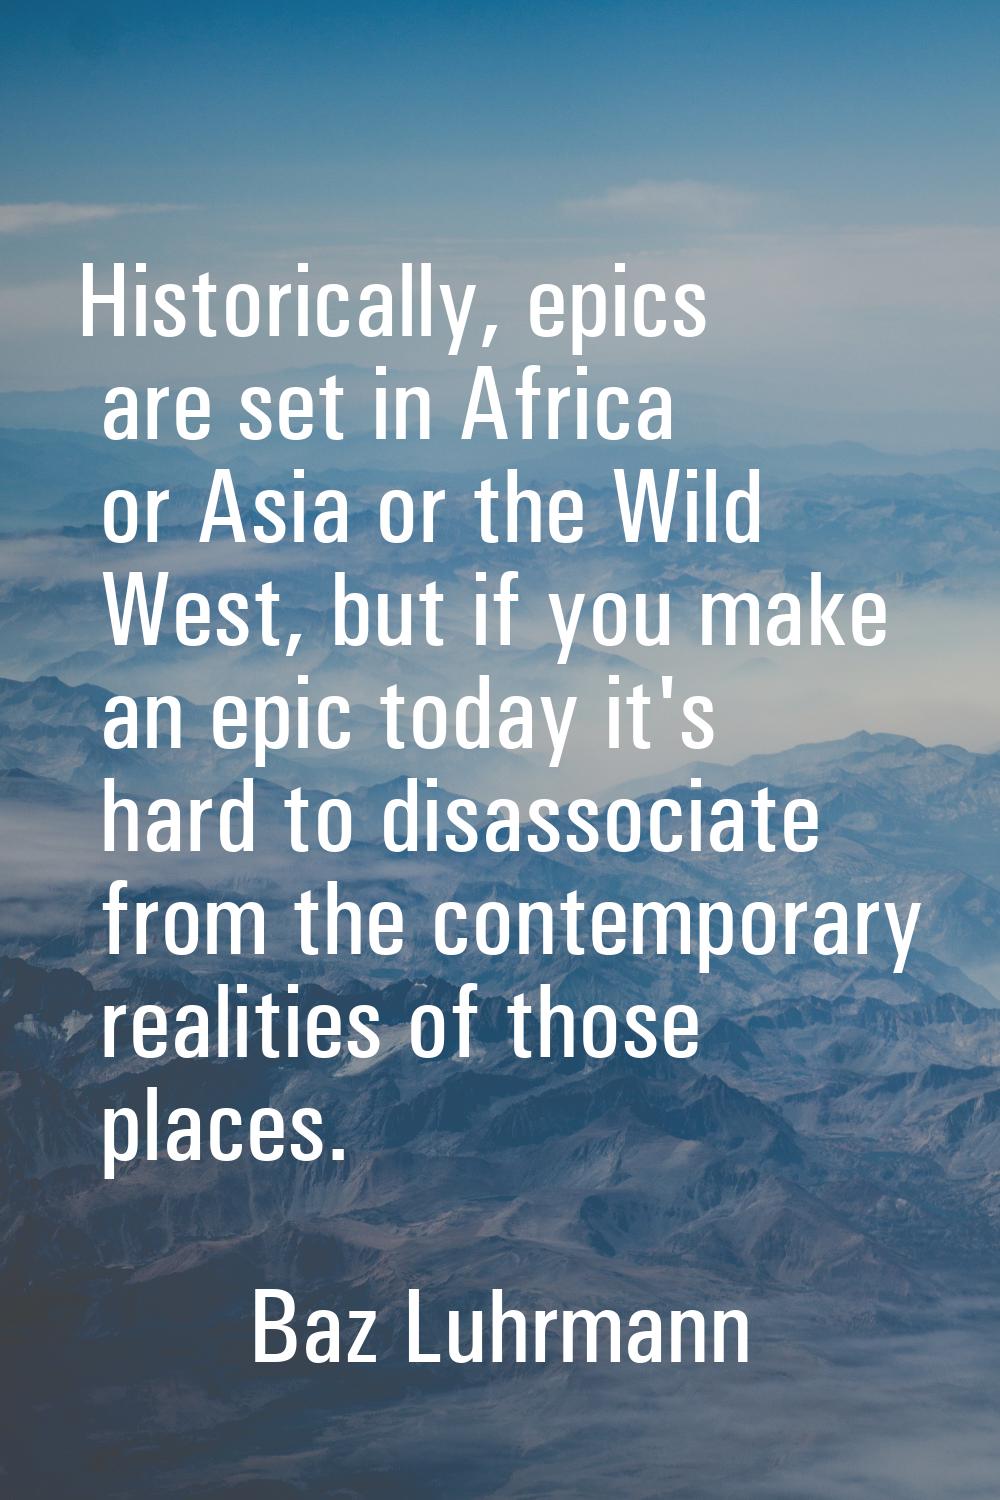 Historically, epics are set in Africa or Asia or the Wild West, but if you make an epic today it's 